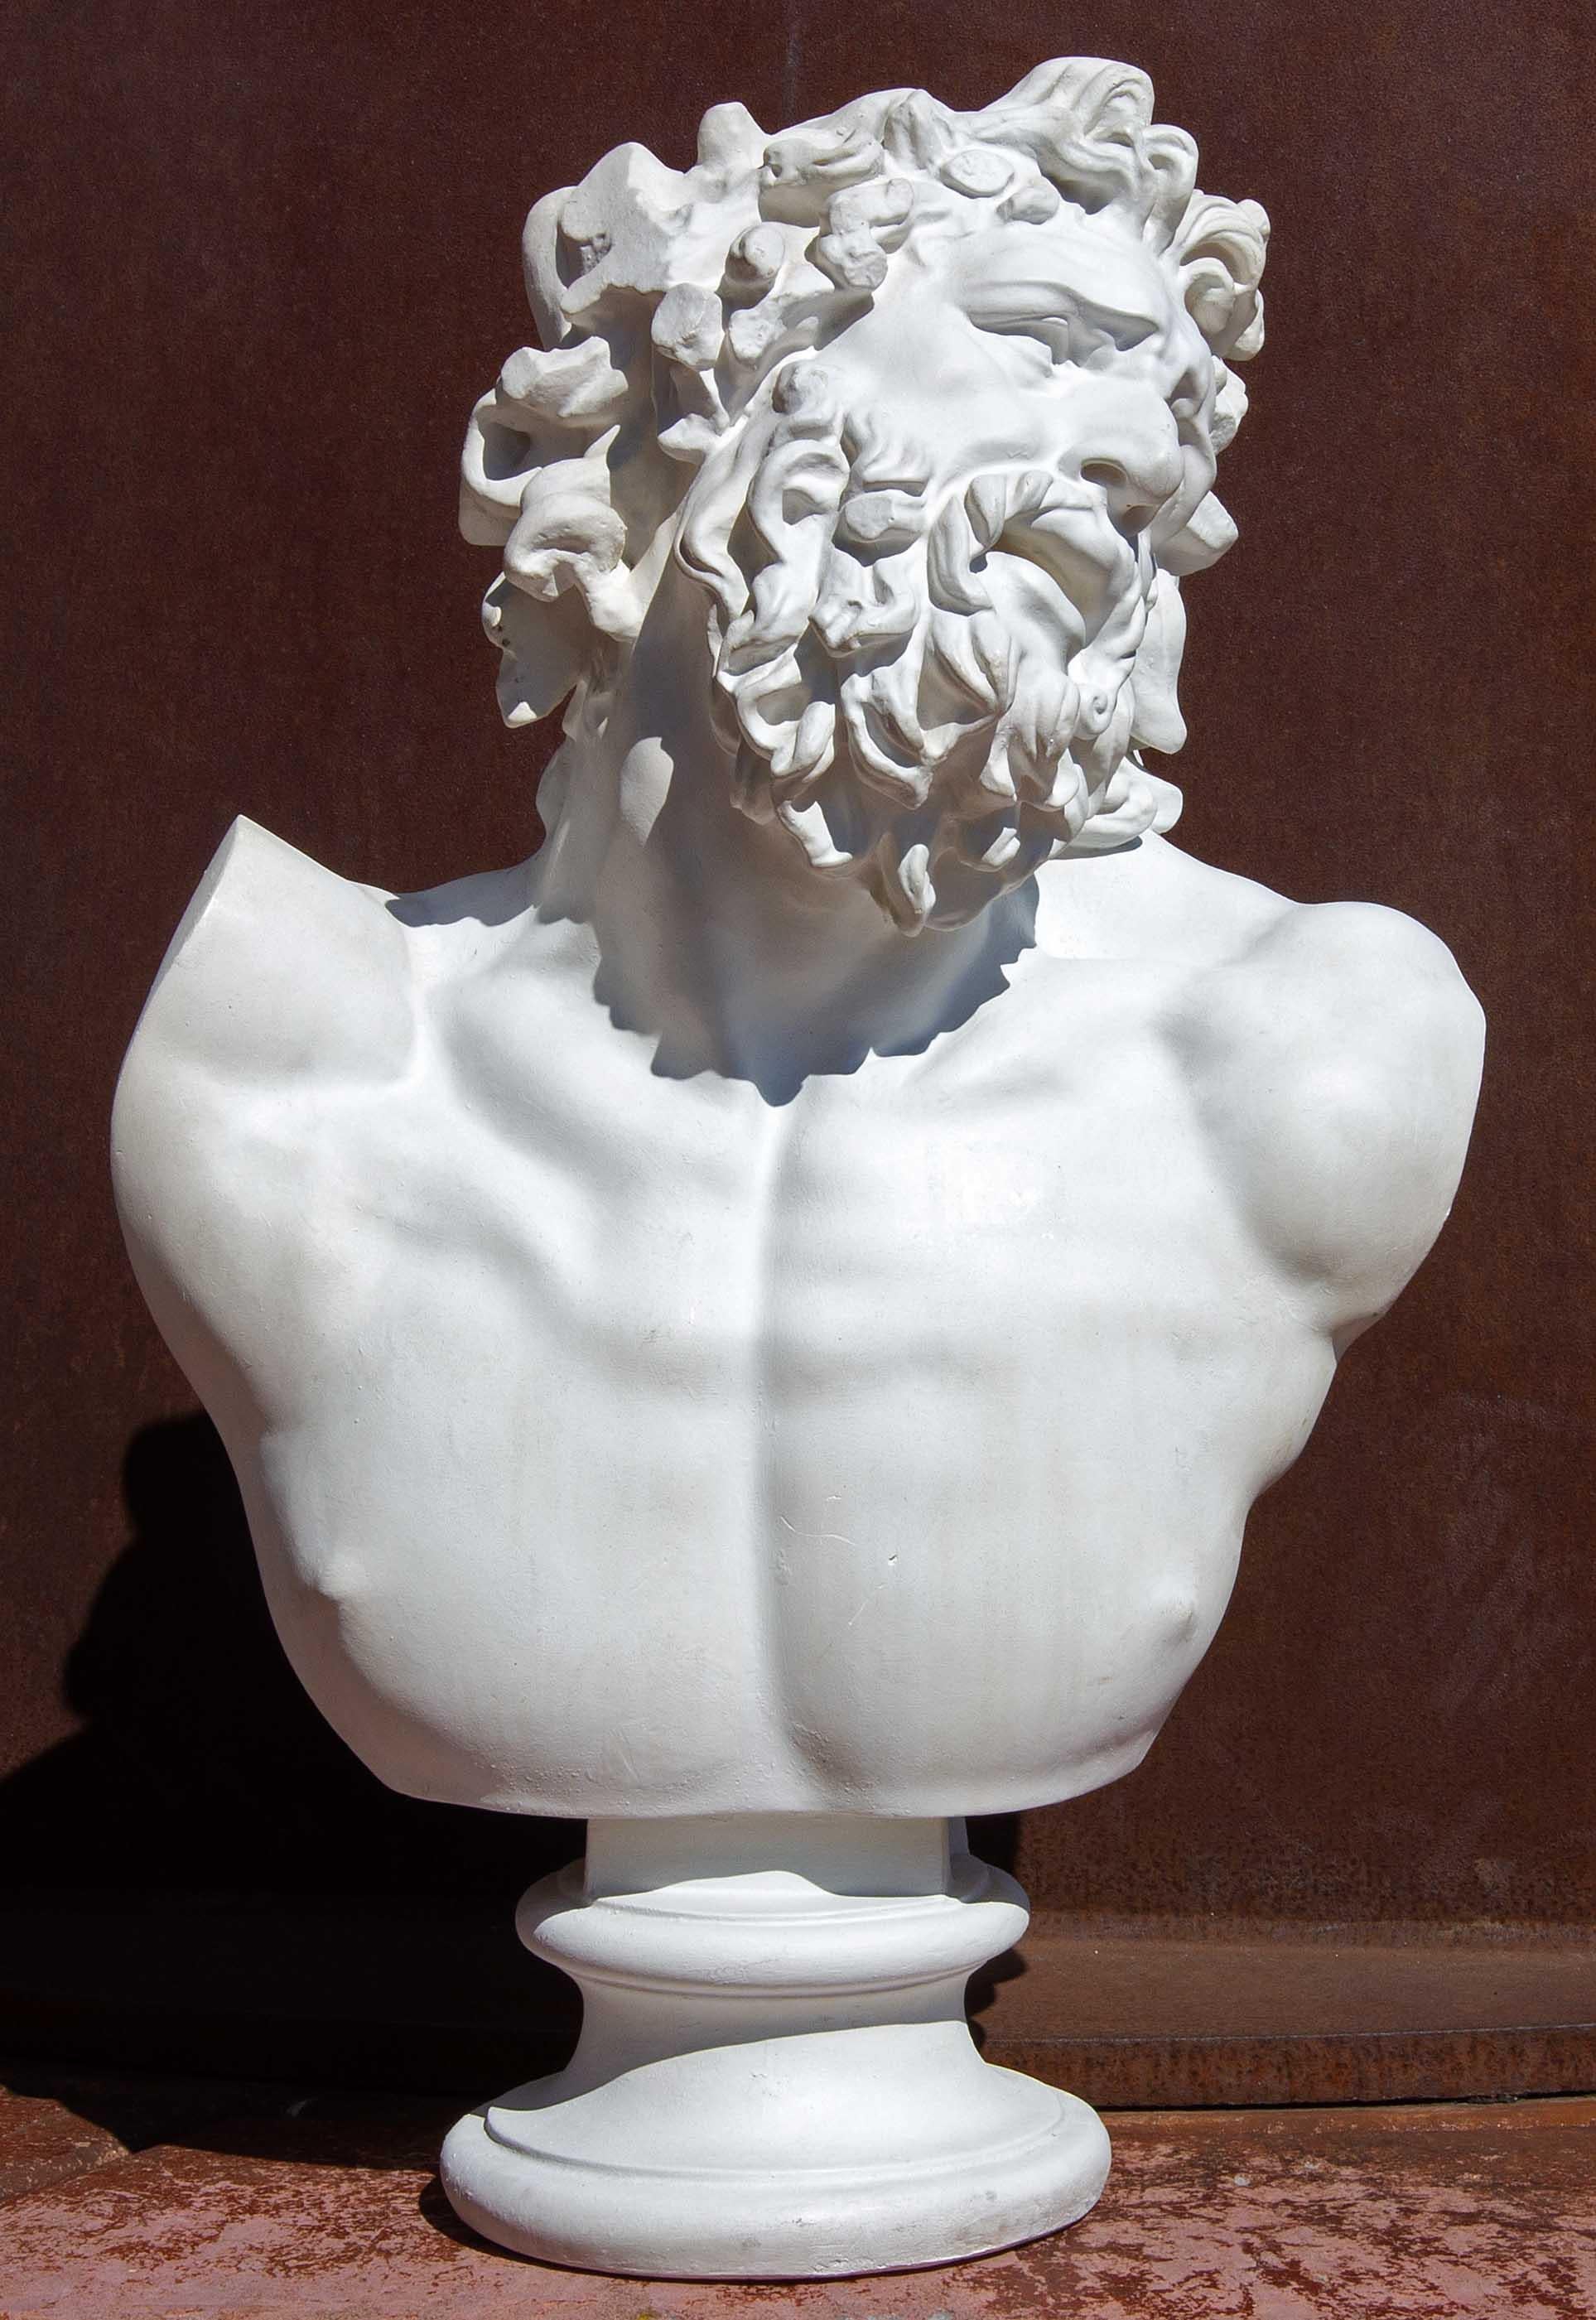 Classical Renaissance Bust of Man - Sculpture by Unknown